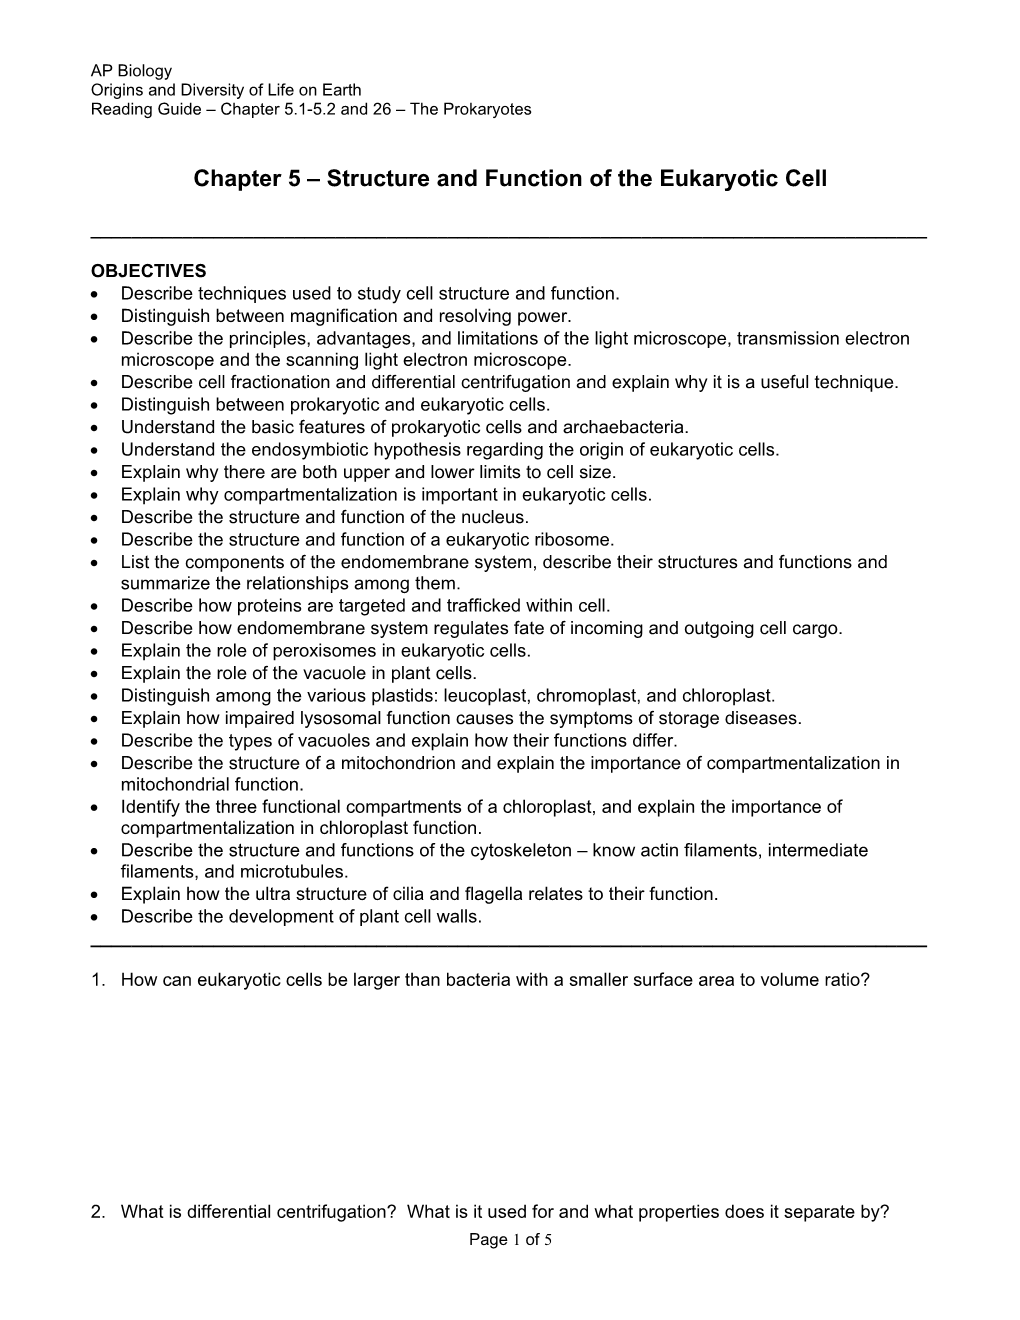 Chapter 5 Structure and Function of the Eukaryotic Cell